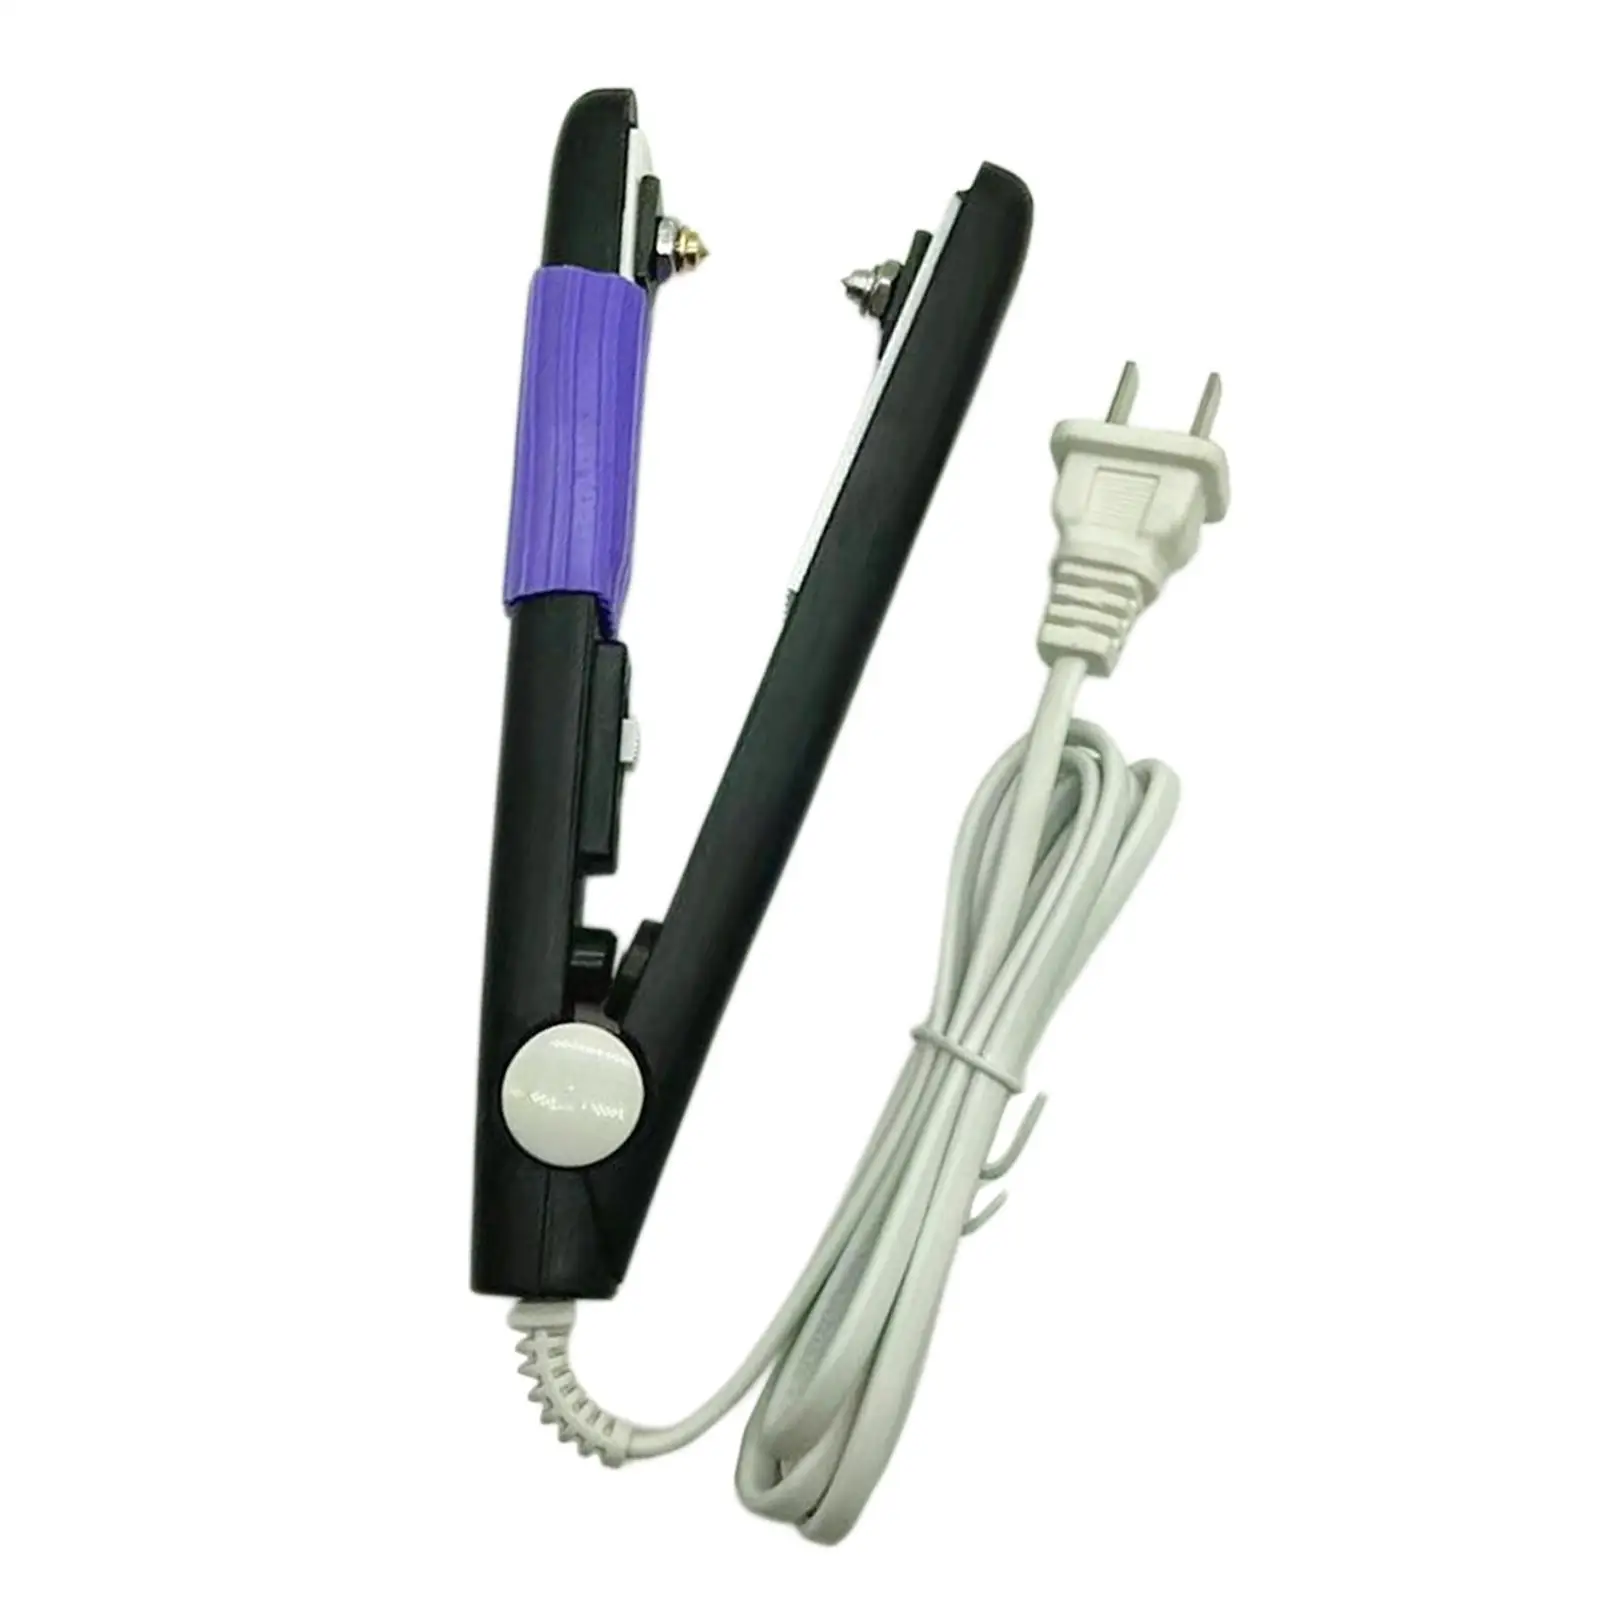 Handheld Heat Press Badminton Racket Pliers String Machine Tennis Racquet Clamp Plier for Removal Install Eyelet Racquet Sports